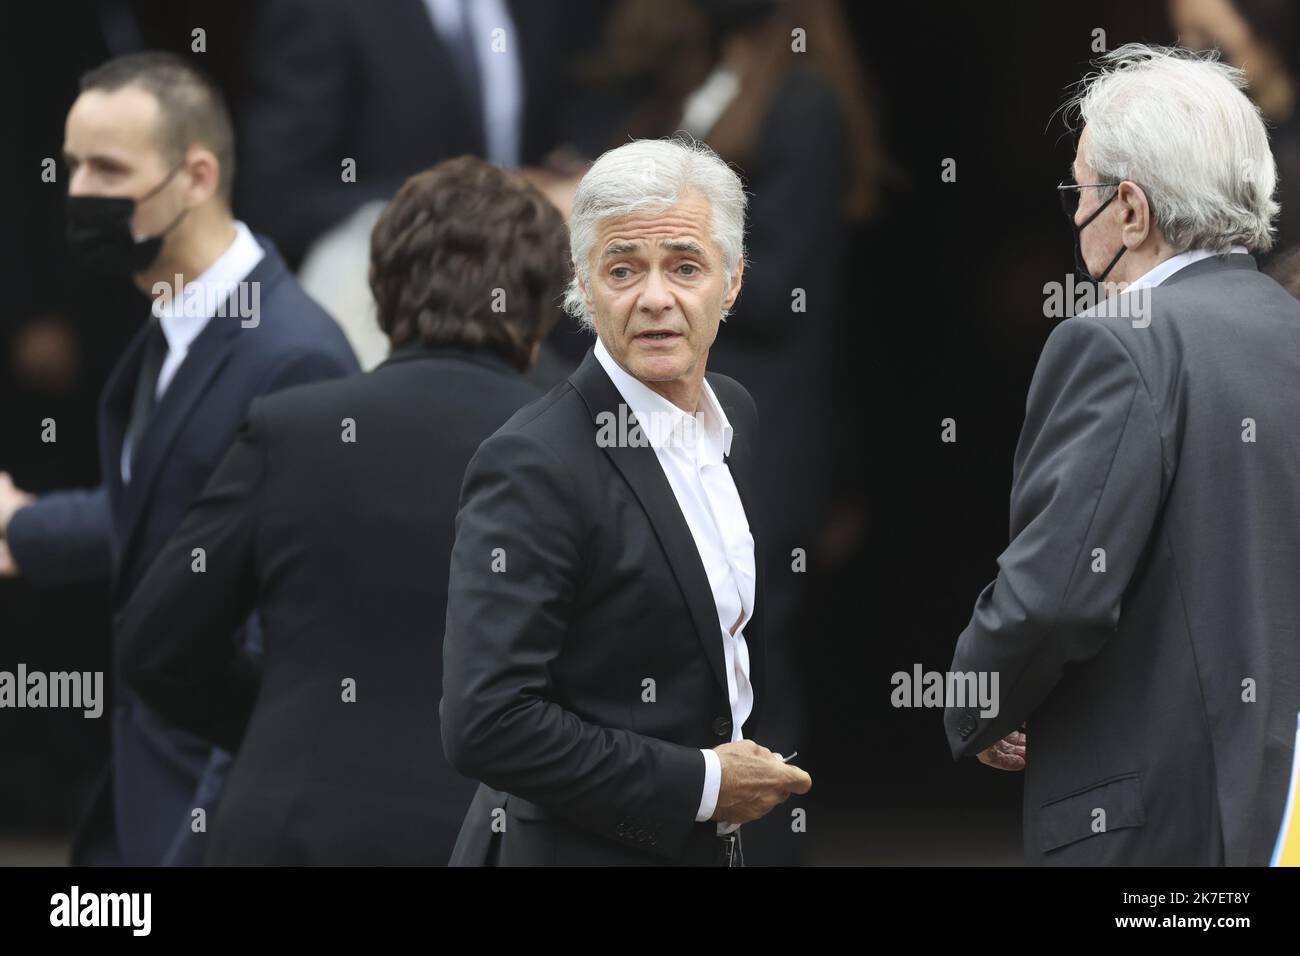 ©Sebastien Muylaert/MAXPPP - French producer and TV host Cyril Viguie arrives for the funeral ceremony for late French actor Jean-Paul Belmondo at the Saint-Germain-des-Pres church in Paris, France. Belmondo died on 06 September 2021 at the age of 88 years. 10.09.2021 Stock Photo